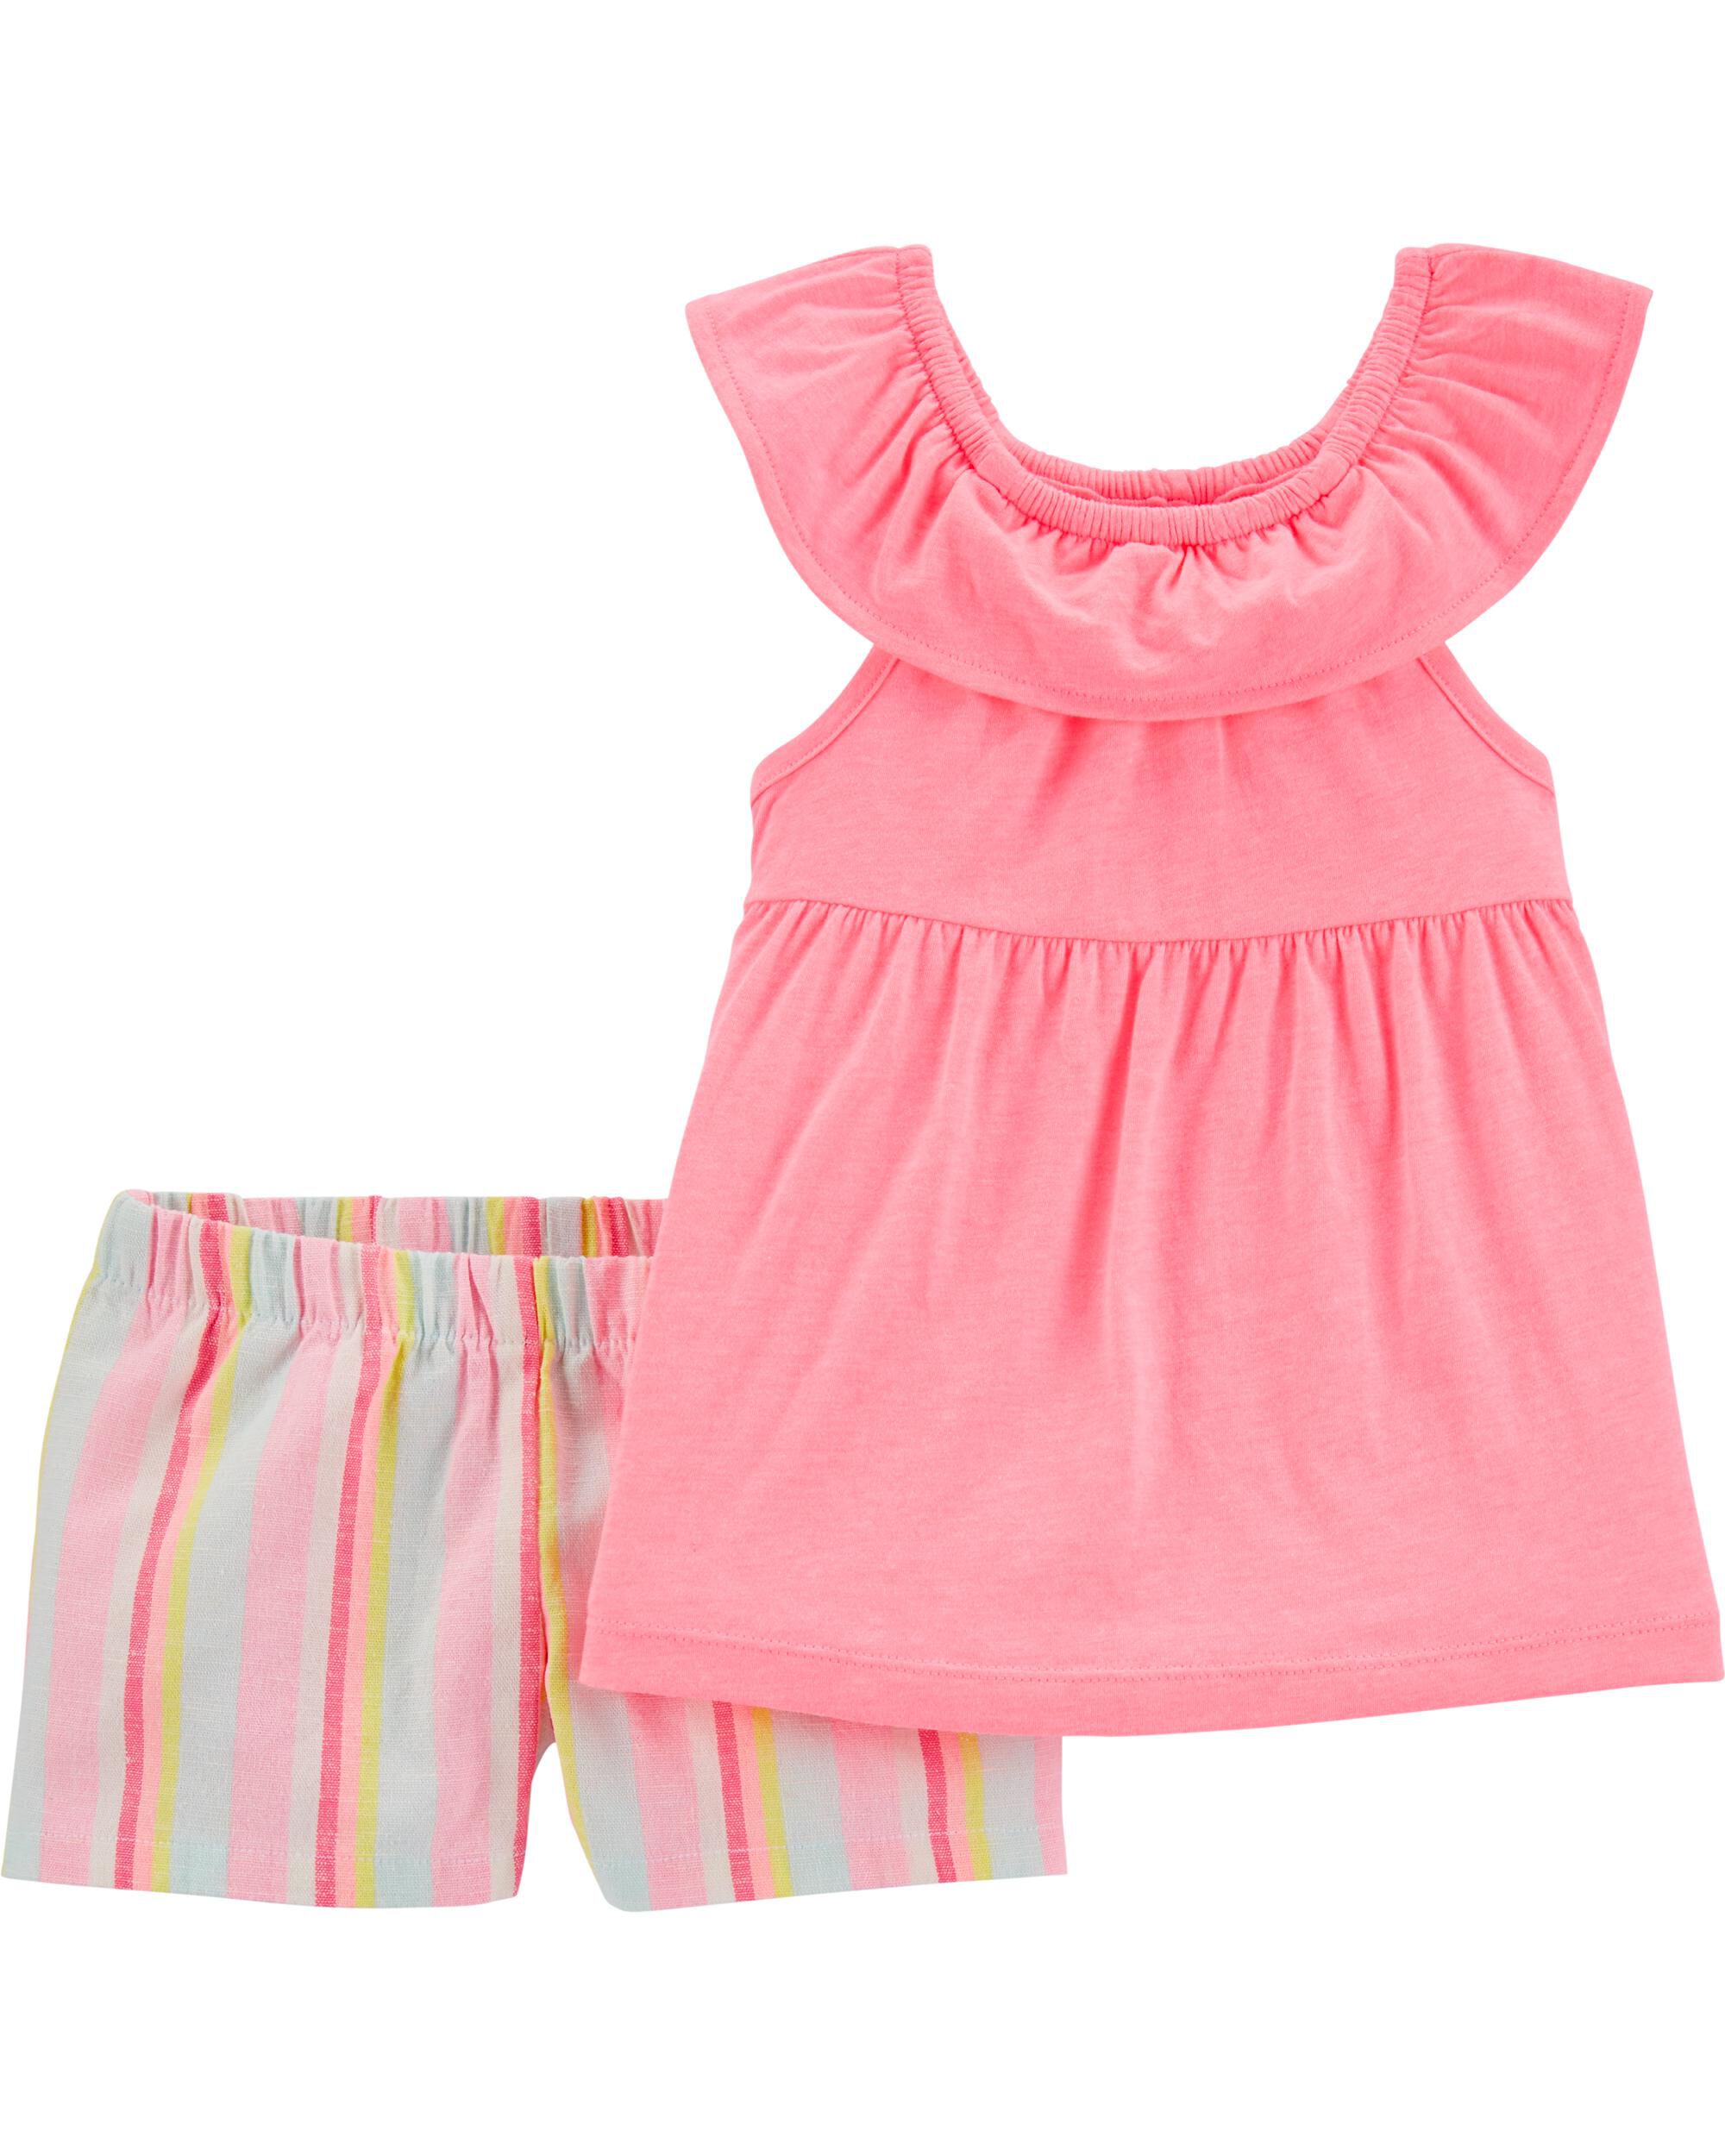 carters baby girl clothes on sale